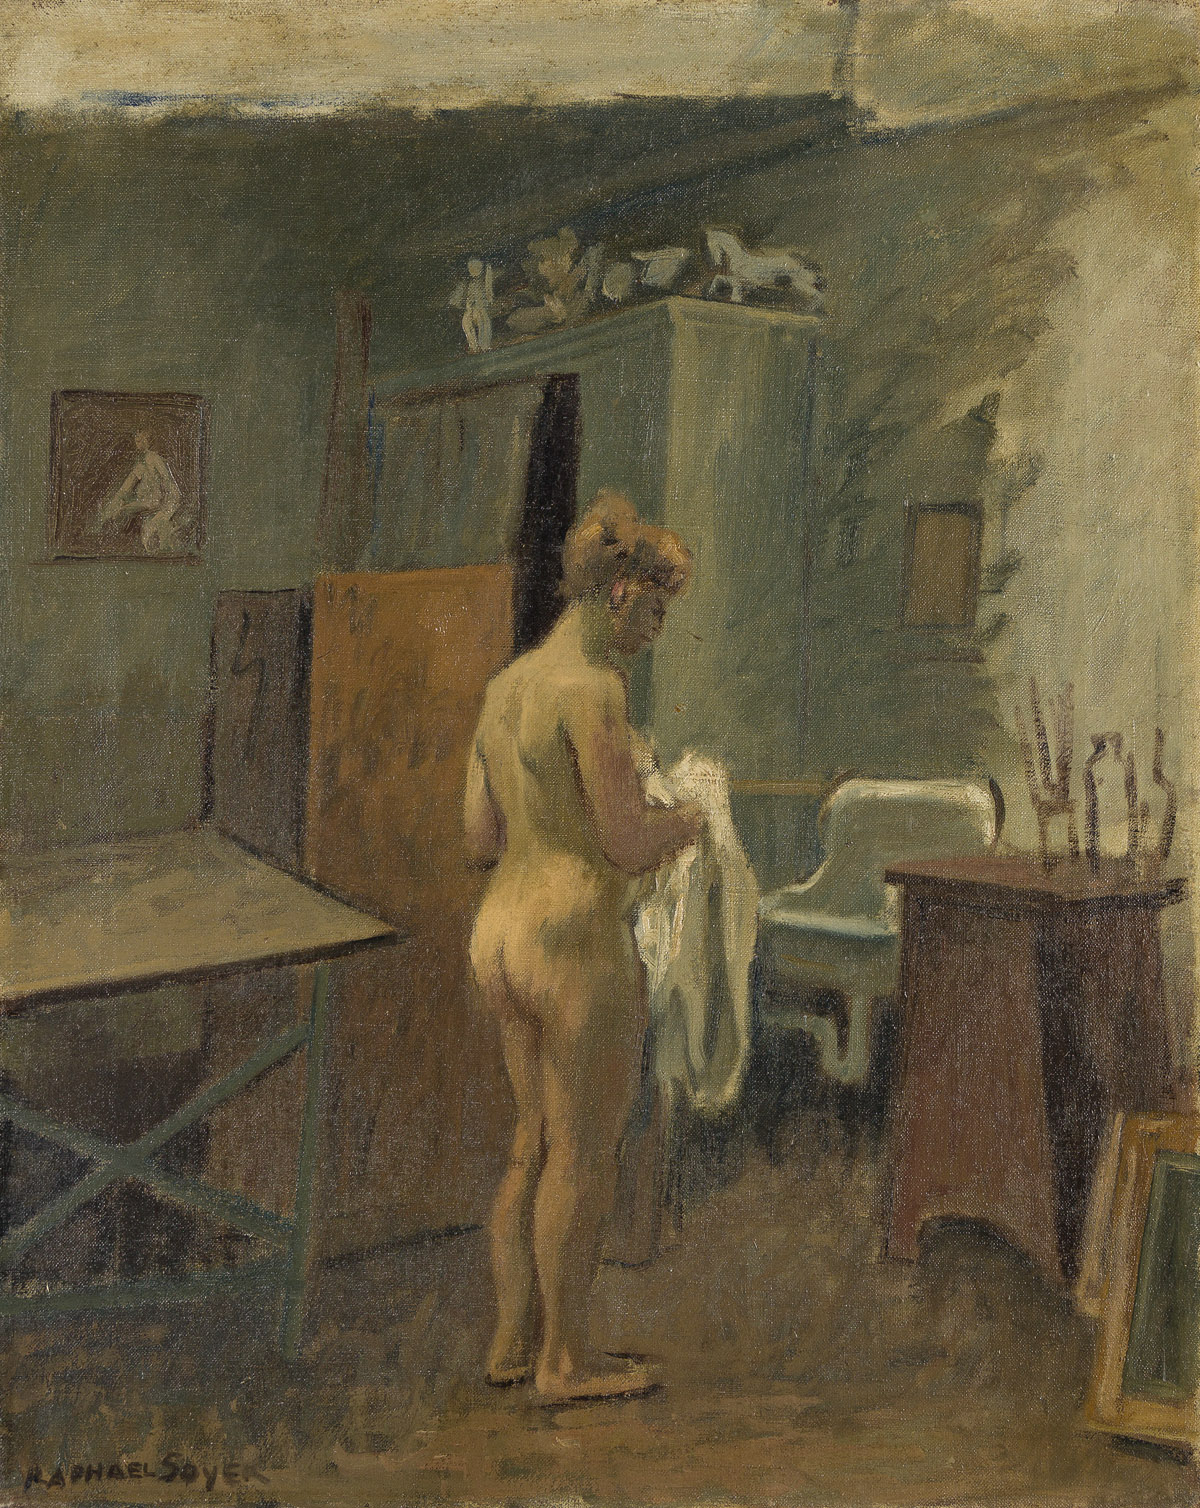 RAPHAEL SOYER (1899-1987) Nude in an Interior.